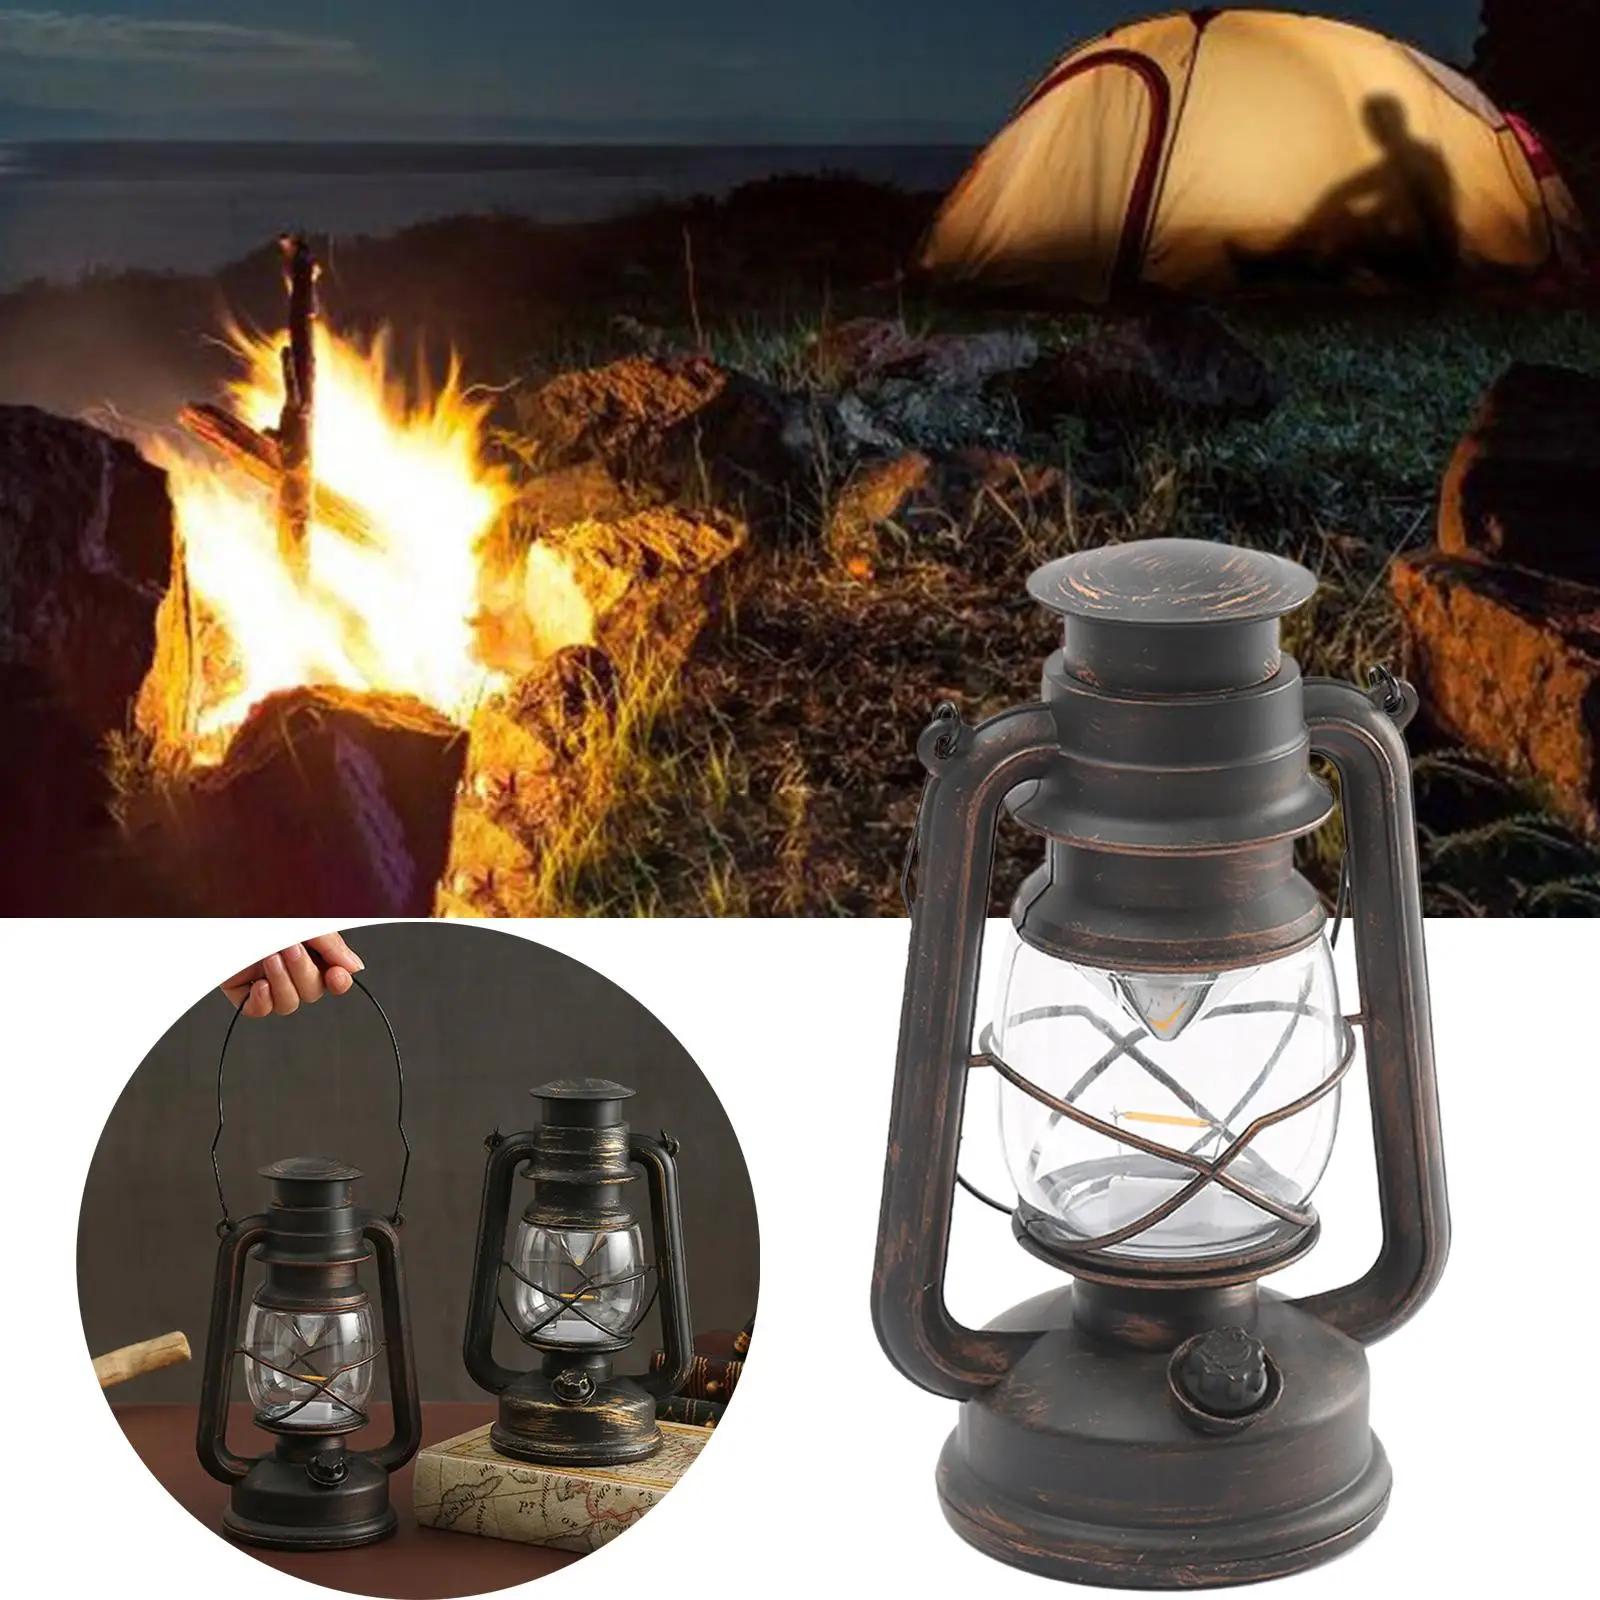 Retro Style Oil Lamp Table Lantern Outdoor Camping Tent Light for Emergency